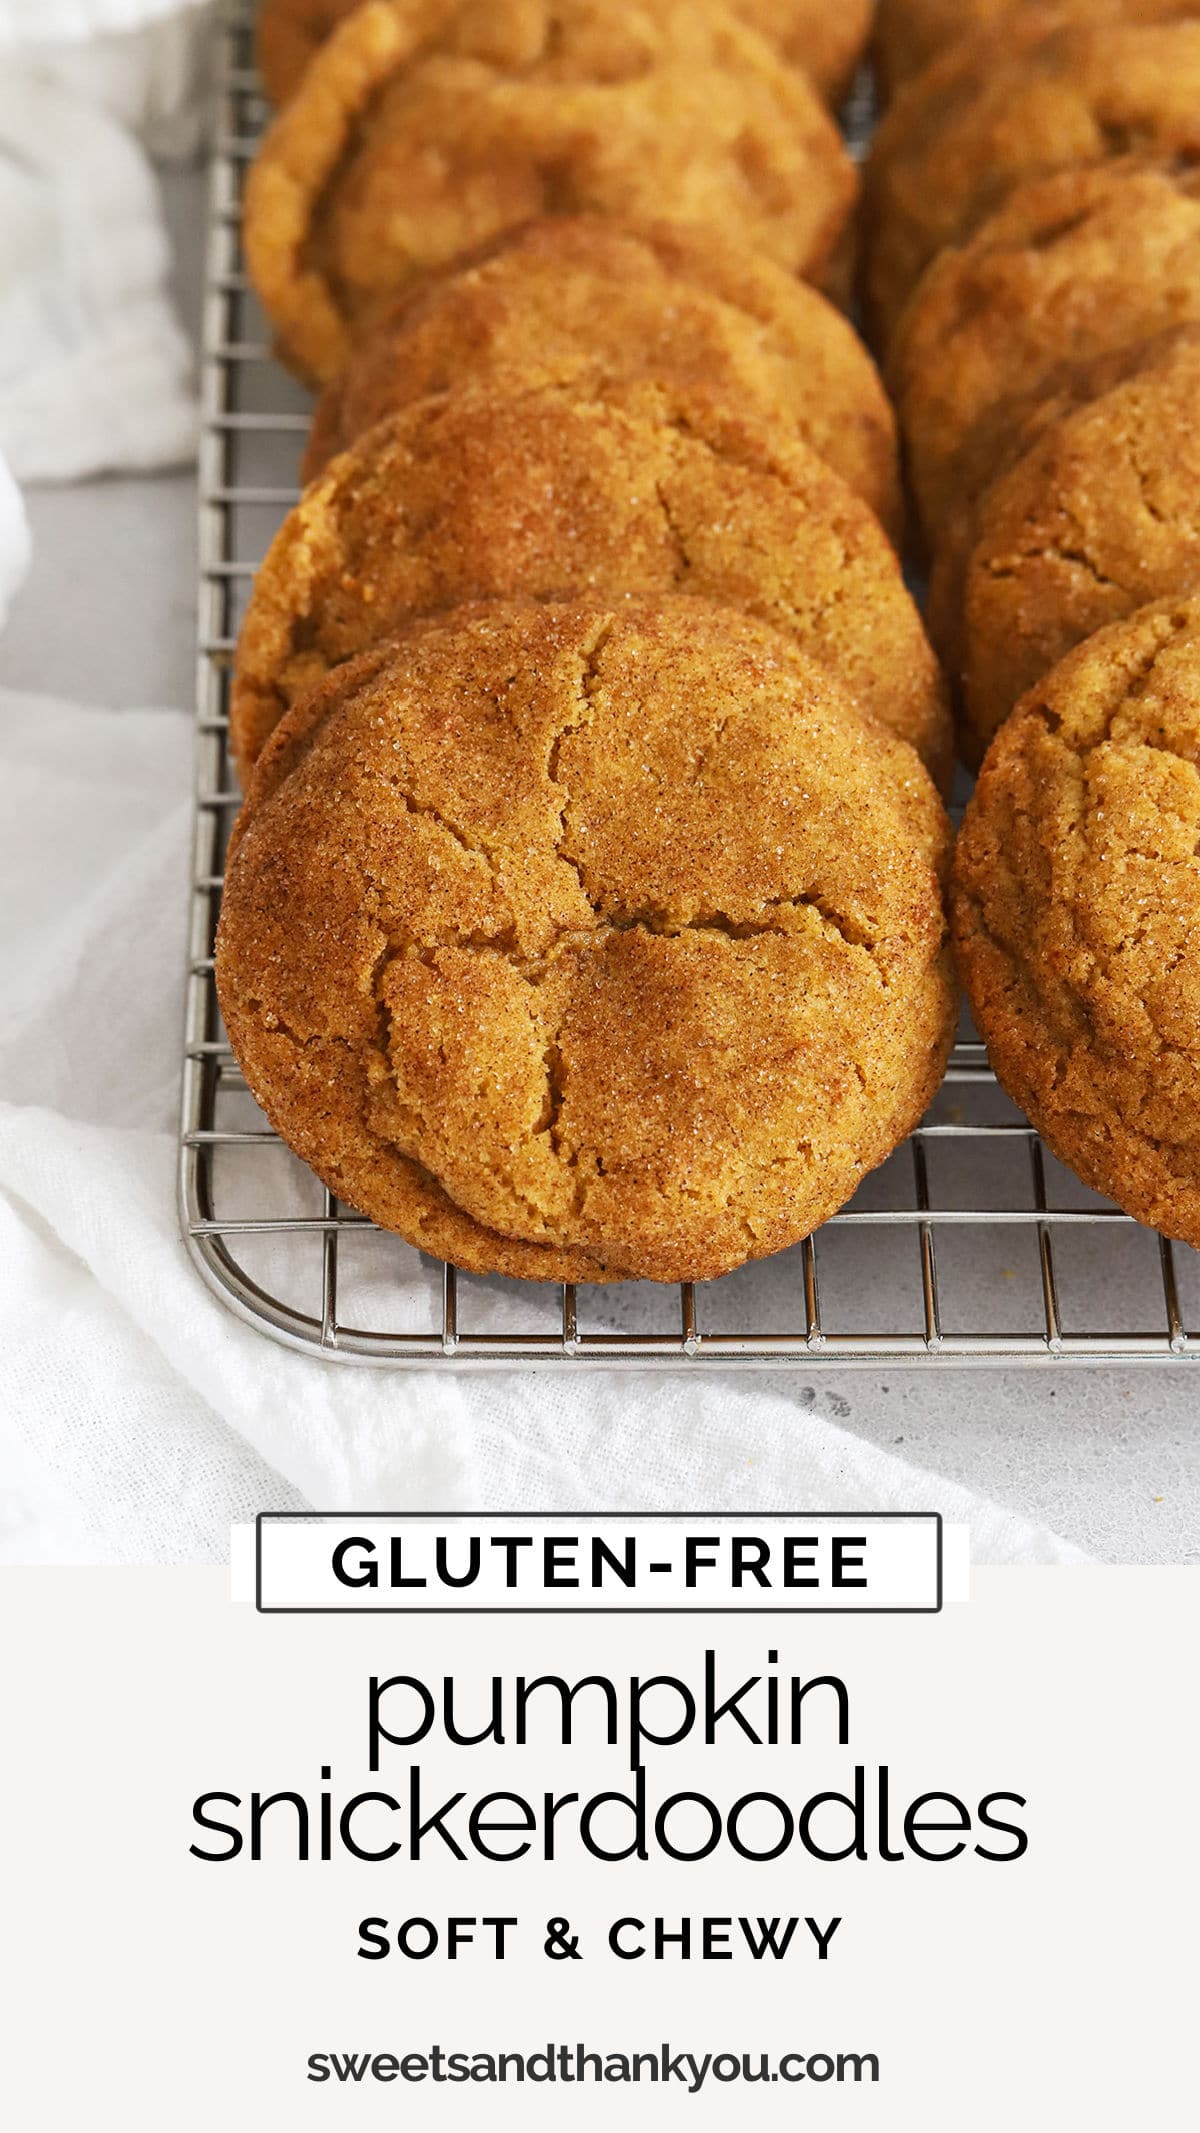 Gluten-Free Pumpkin Snickerdoodles - These soft, chewy gluten-free pumpkin snickerdoodle cookies are perfect when the weather gets chilly! // gluten-free pumpkin cookies / gluten-free holiday cookies / gluten-free pumpkin recipes / gluten-free snickerdoodles recipe / gluten-free snickerdoodle cookies / chewy pumpkin cookies / easy gluten-free cookies recipe / gluten-free cookies recipe